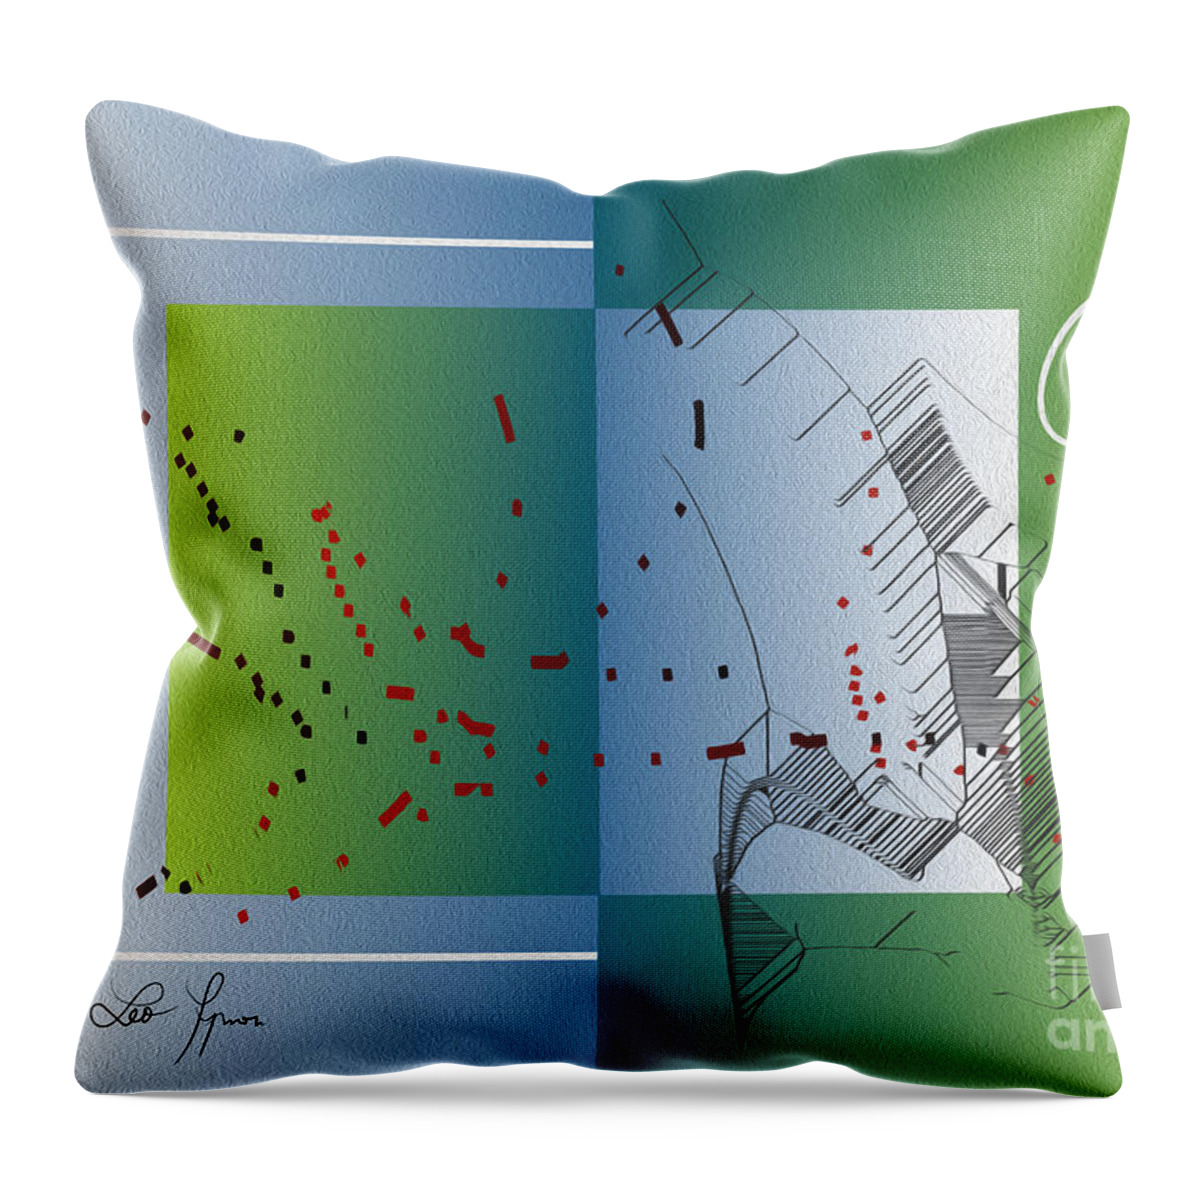 Me Throw Pillow featuring the digital art Between Heaven And Me by Leo Symon